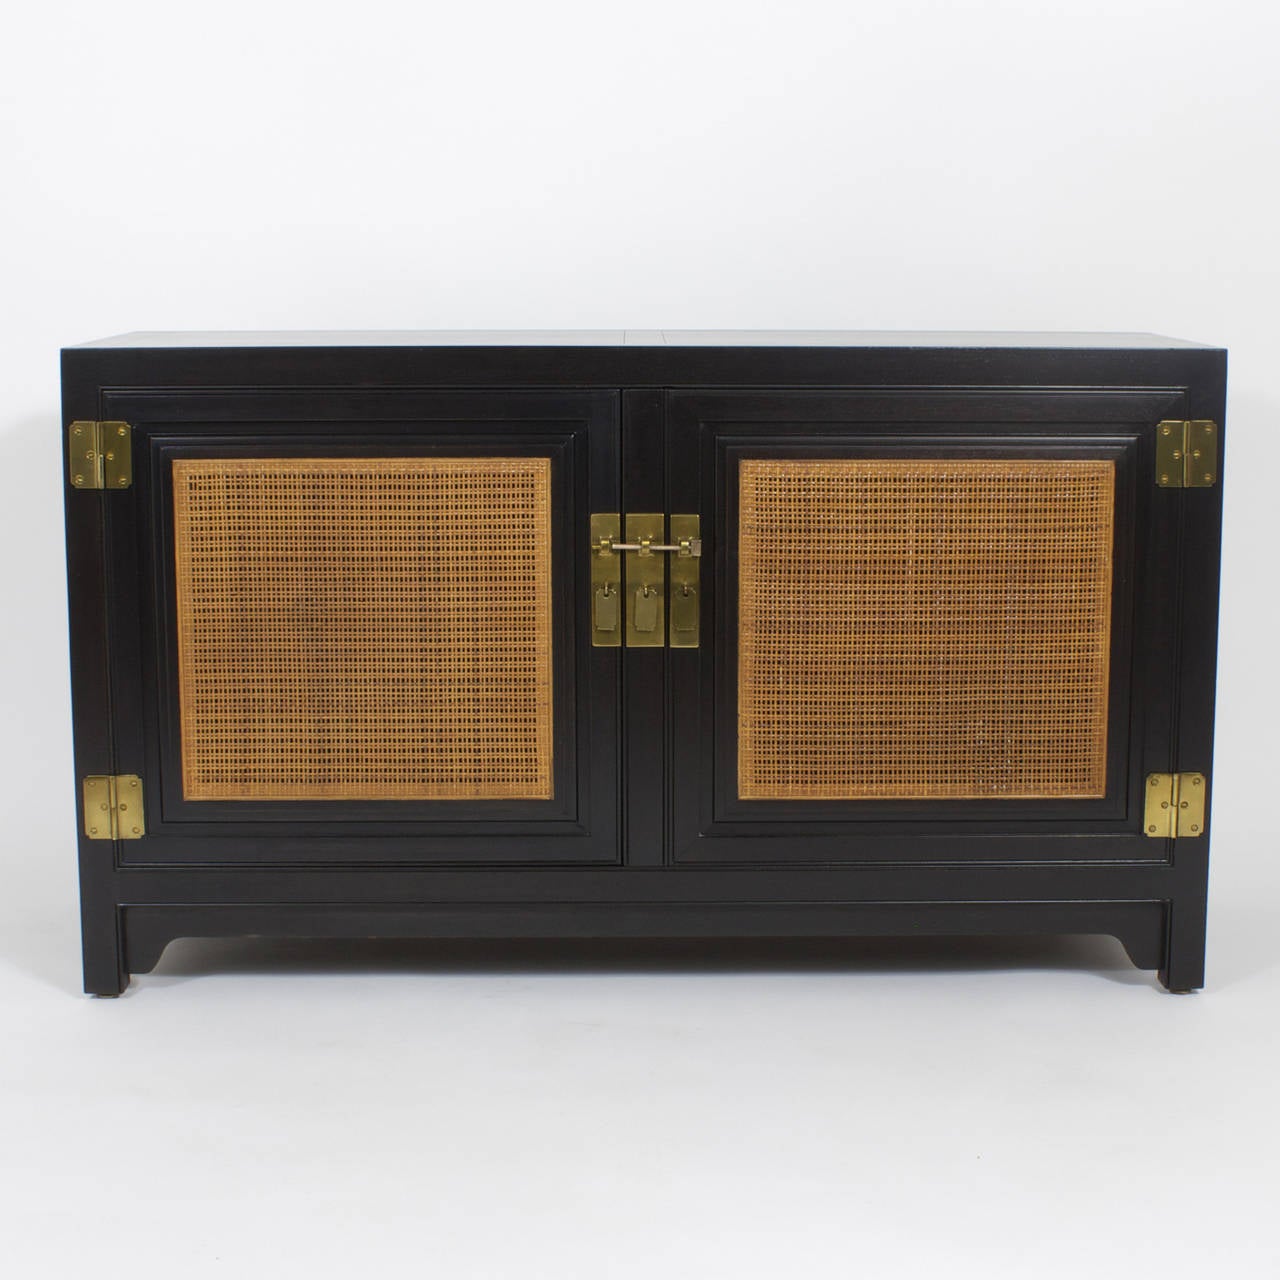 A Midcentury two-door cabinet or sideboard with strong asian influences and an unusual addition of the caned wicker doors. With plenty of storage this makes for the perfect fit under your flat screen television or as the serving sideboard it was